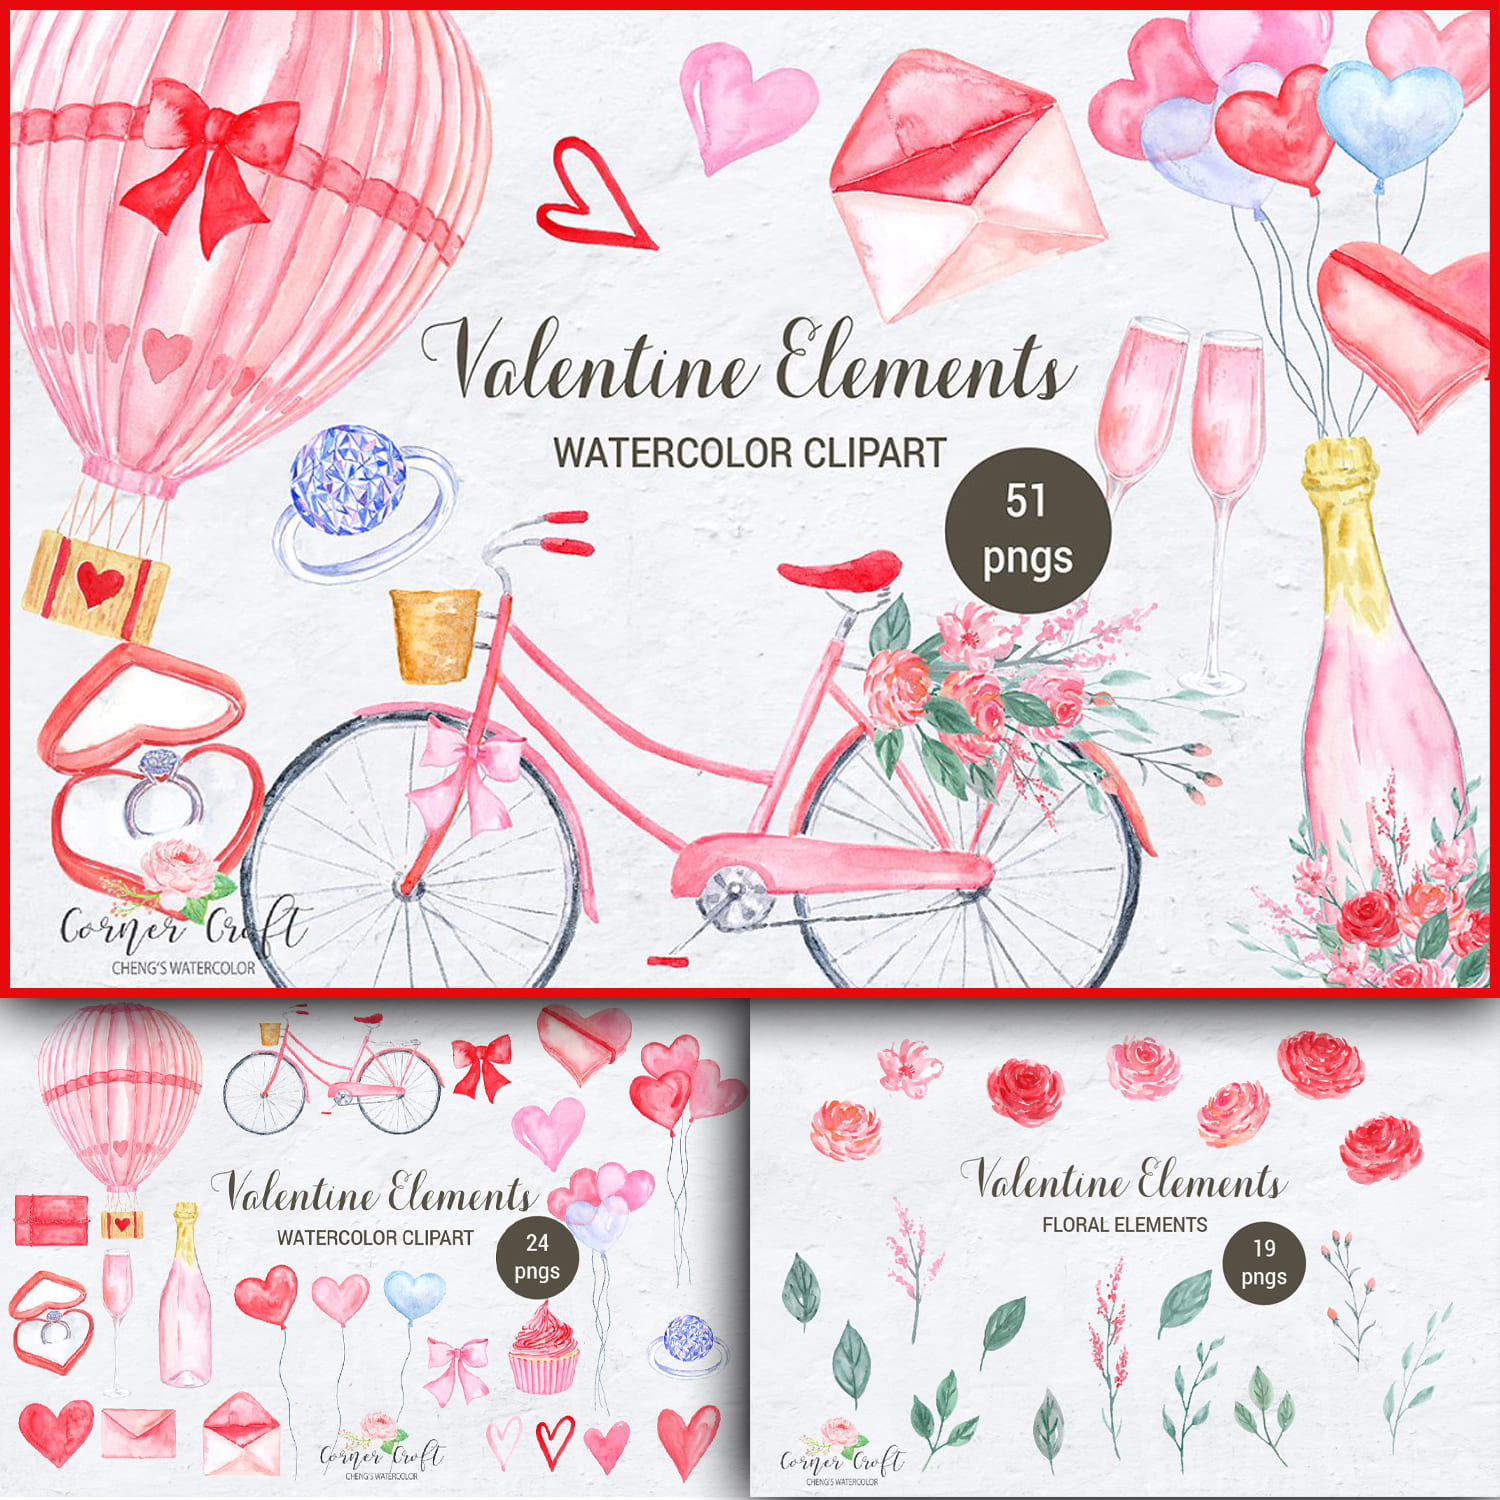 Watercolor Valentine Elements - main image preview.